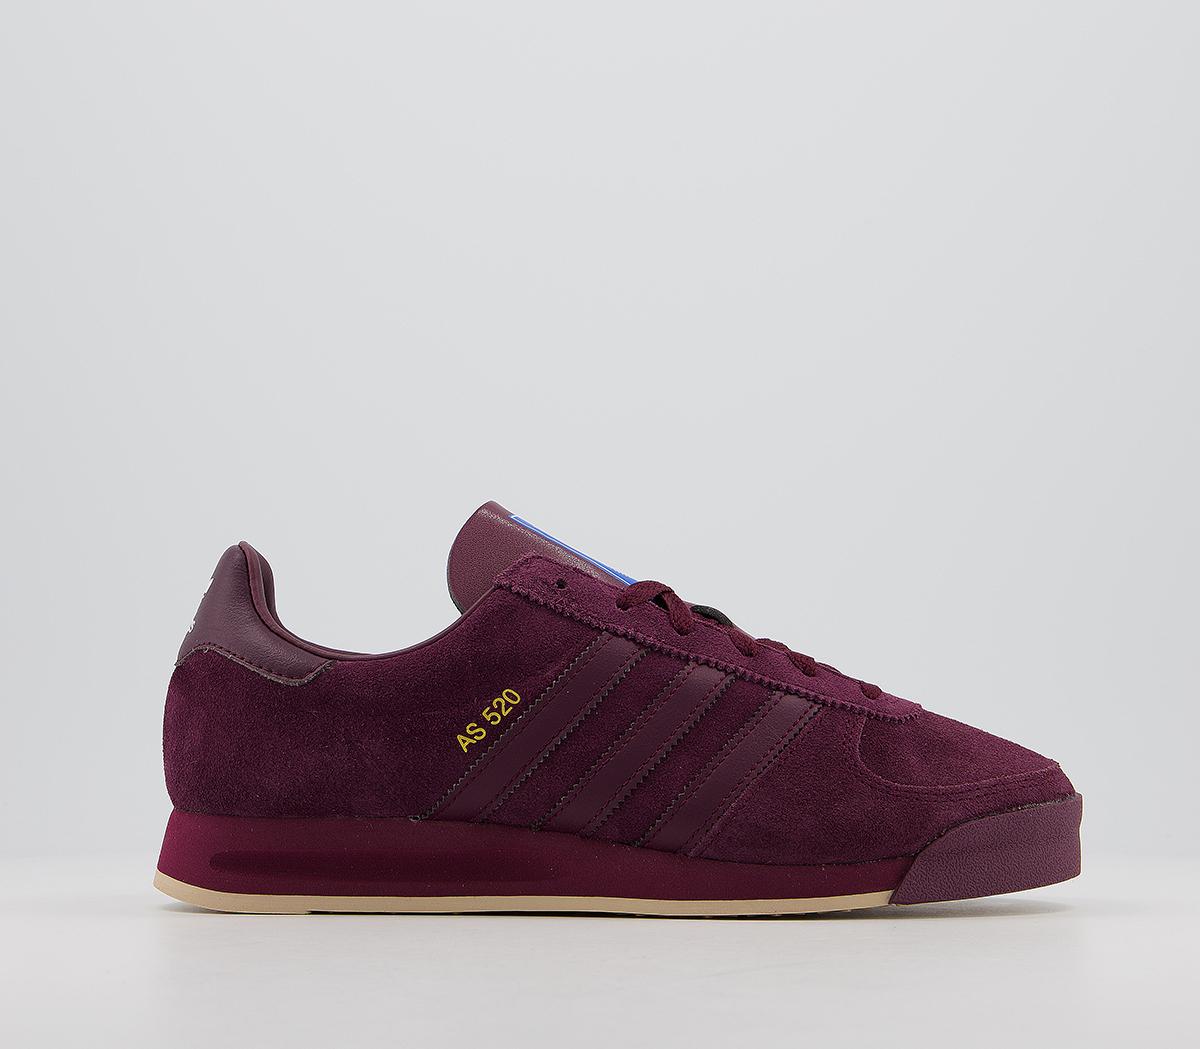 Avonturier beet Sprong adidas As 520 Maroon St Pale Nude - Unisex Sports